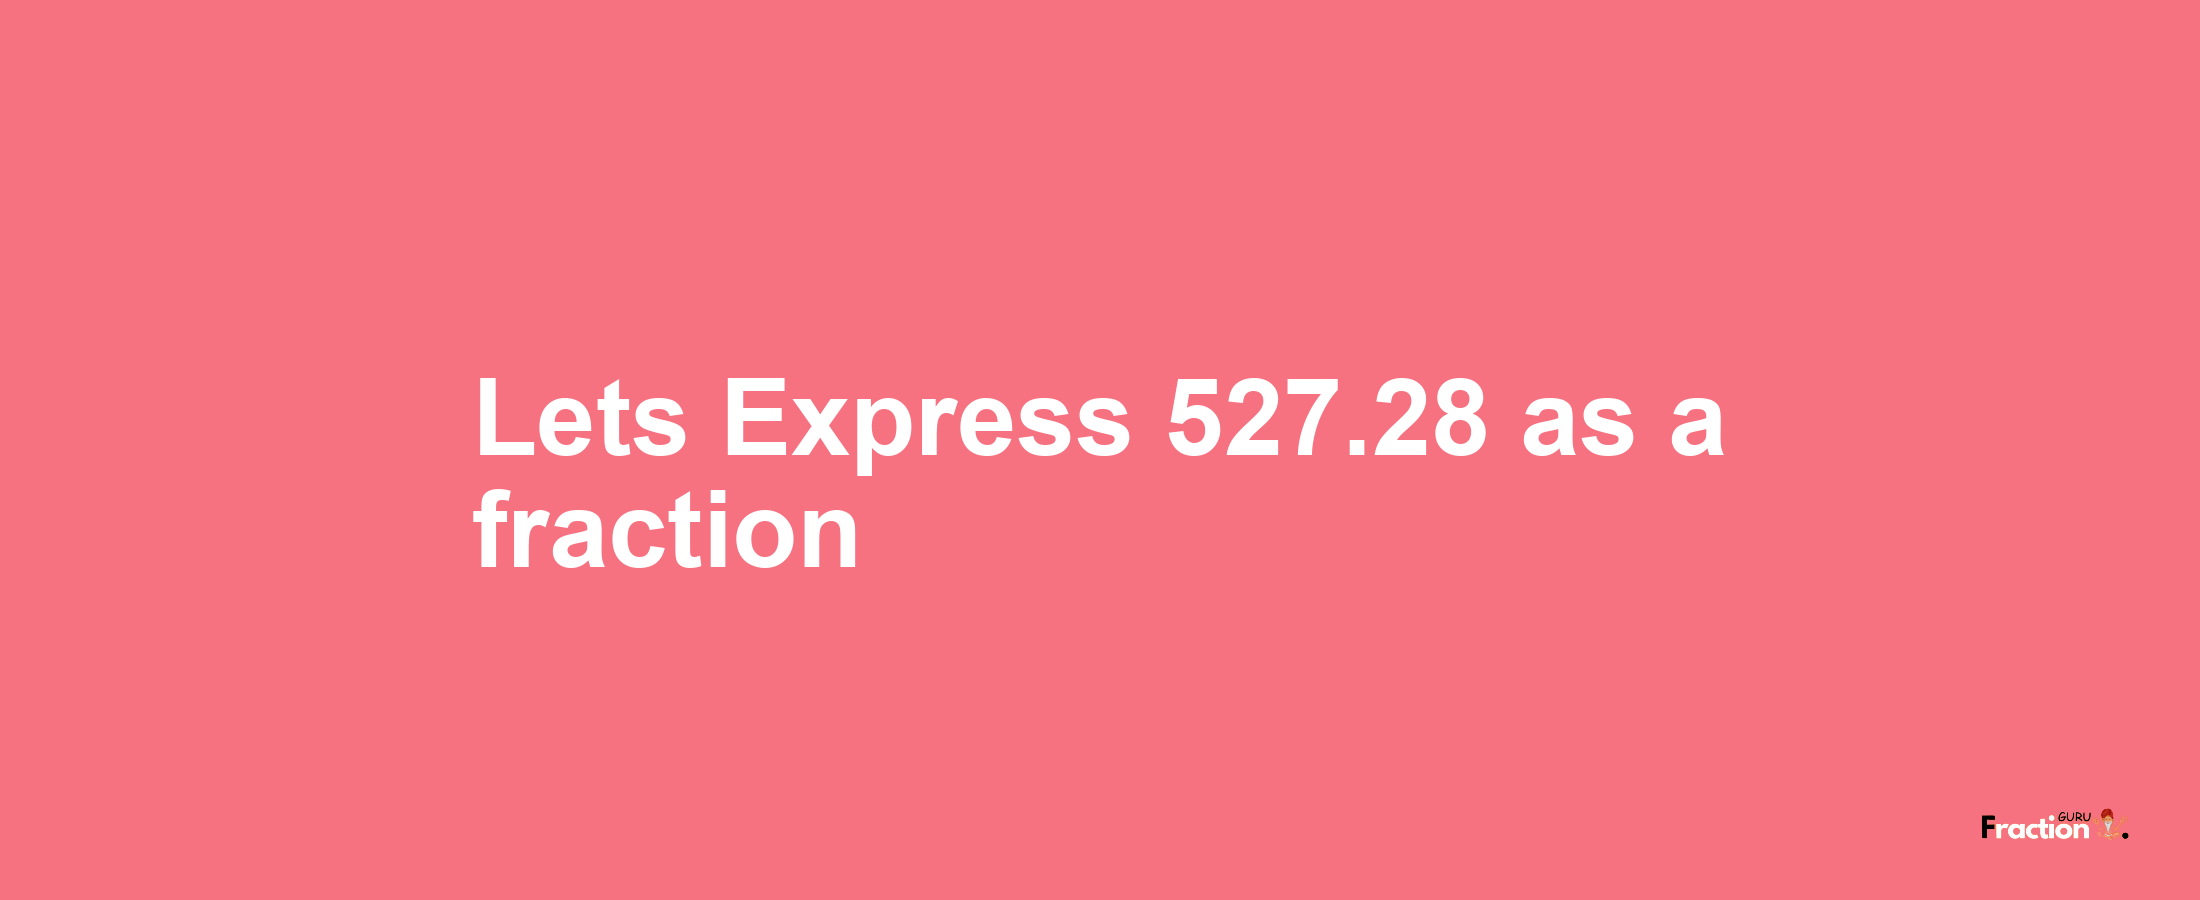 Lets Express 527.28 as afraction